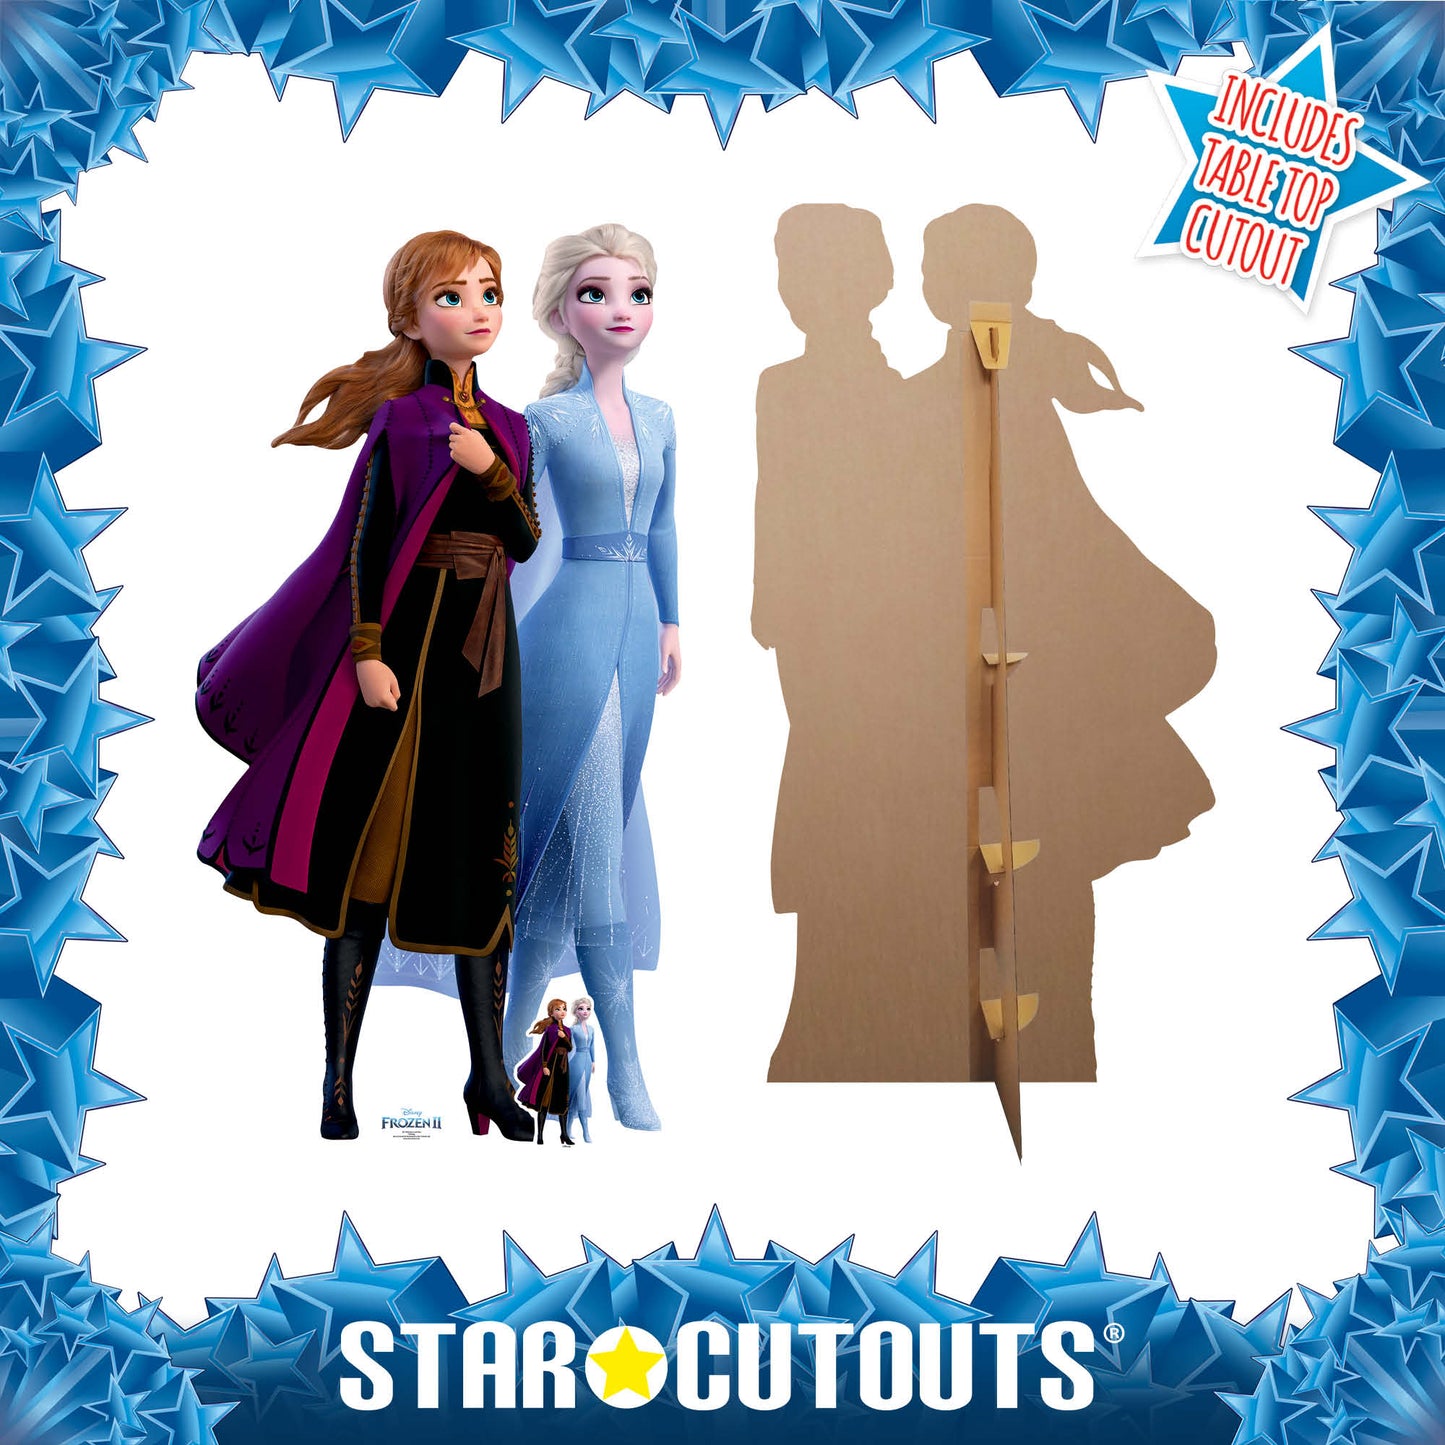 Journey Together Anna and Elsa Frozen Cardboard Cutout